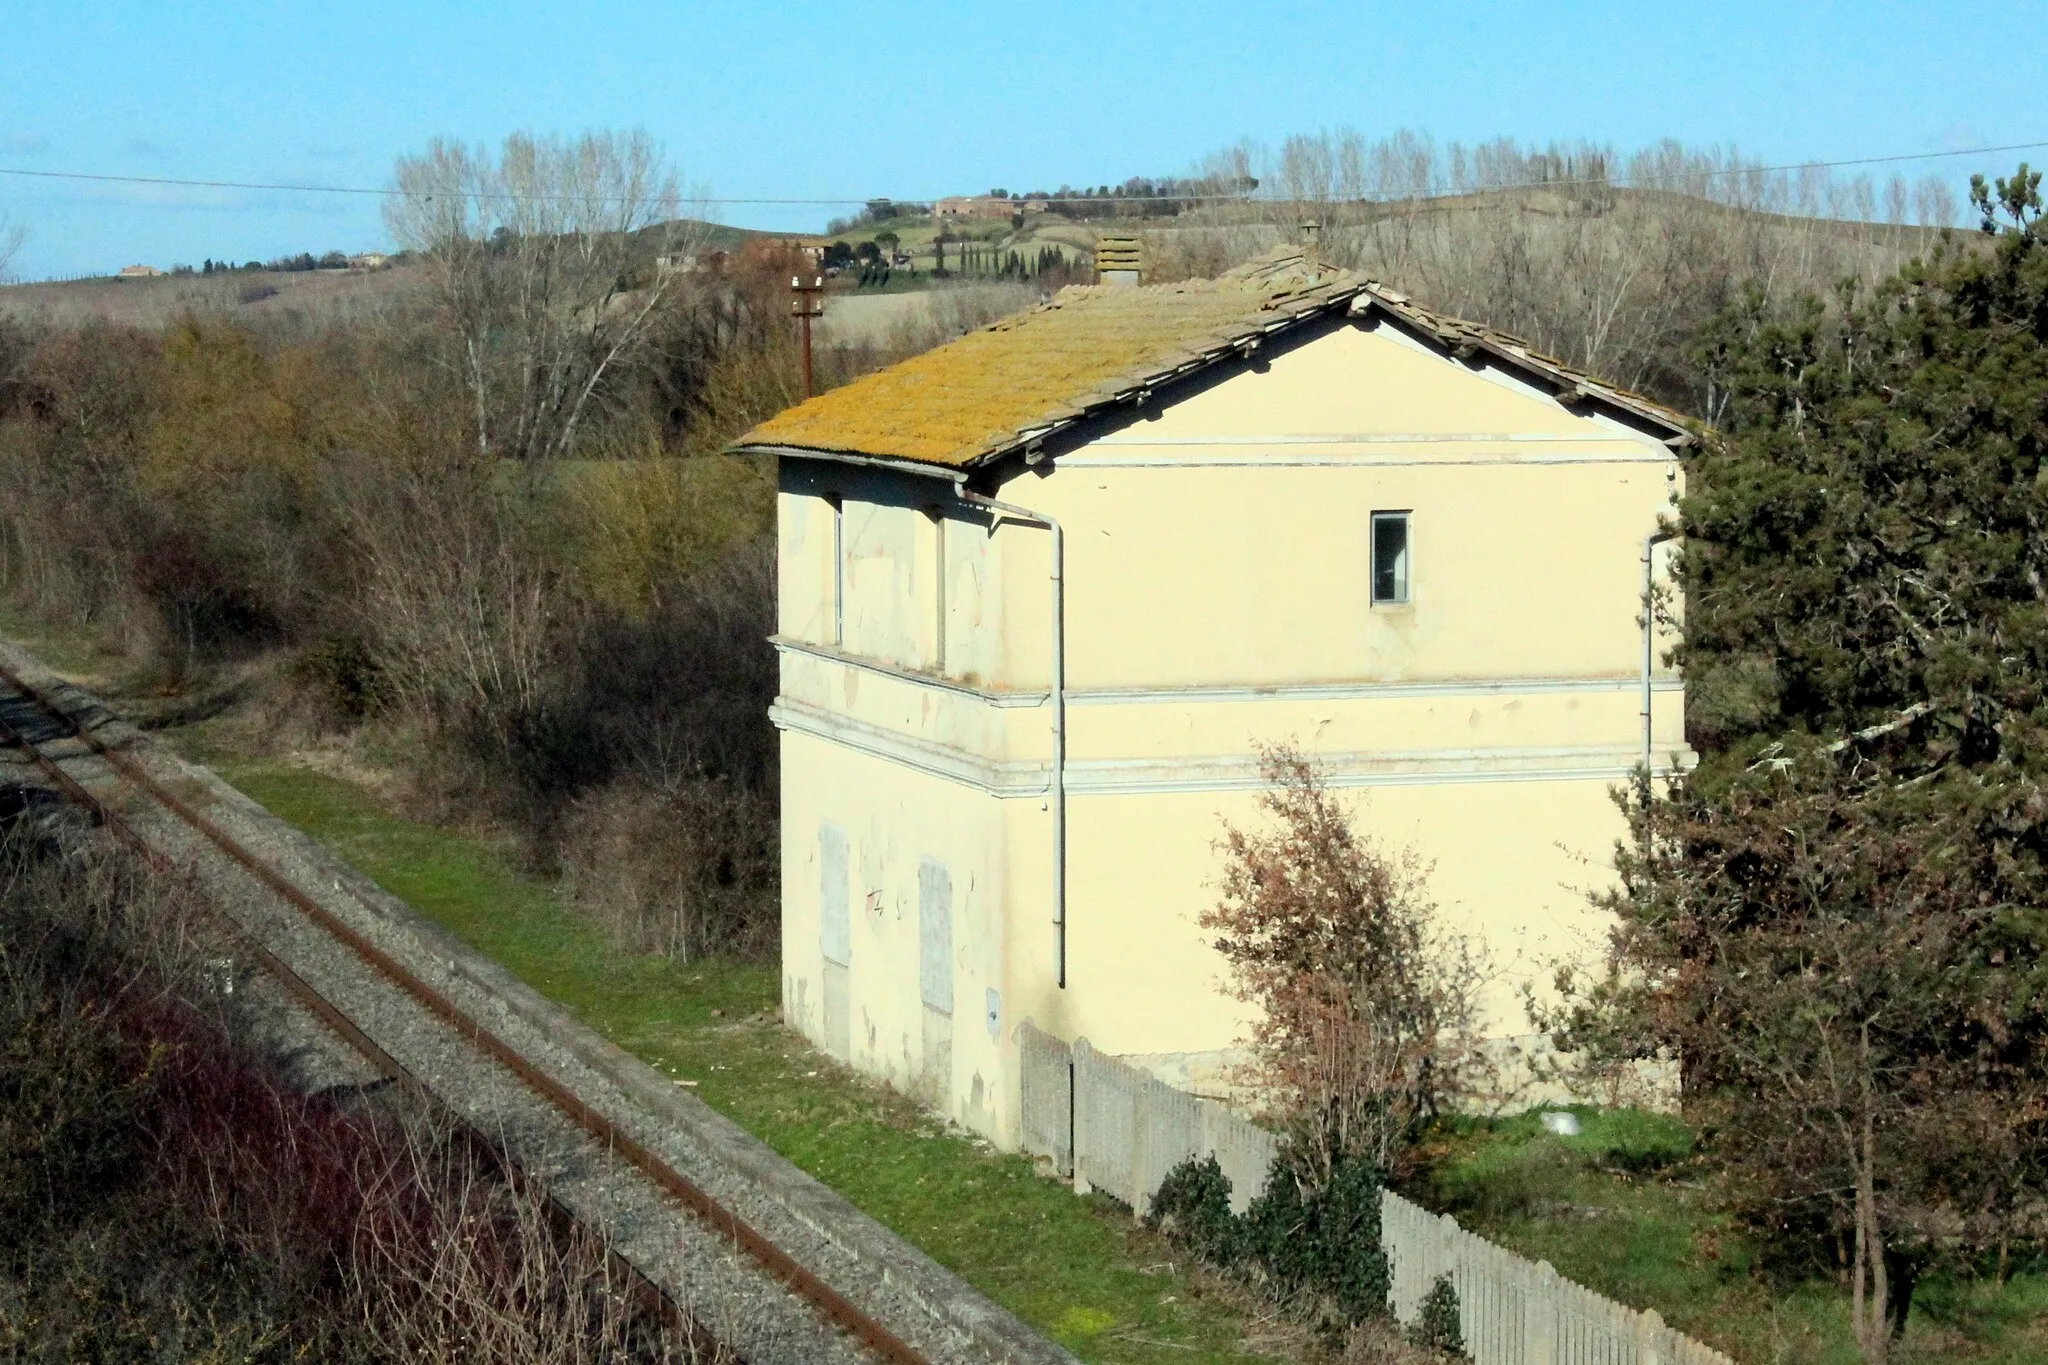 Photo showing: Ponte d'Arbia, Ex-Train Station in Ponte d'Arbia, hamlet of Monteroni d'Arbia and Buonconvento, Province of Siena, Tuscany, Italy. Train Station is on the side of Monteroni d'Arbia